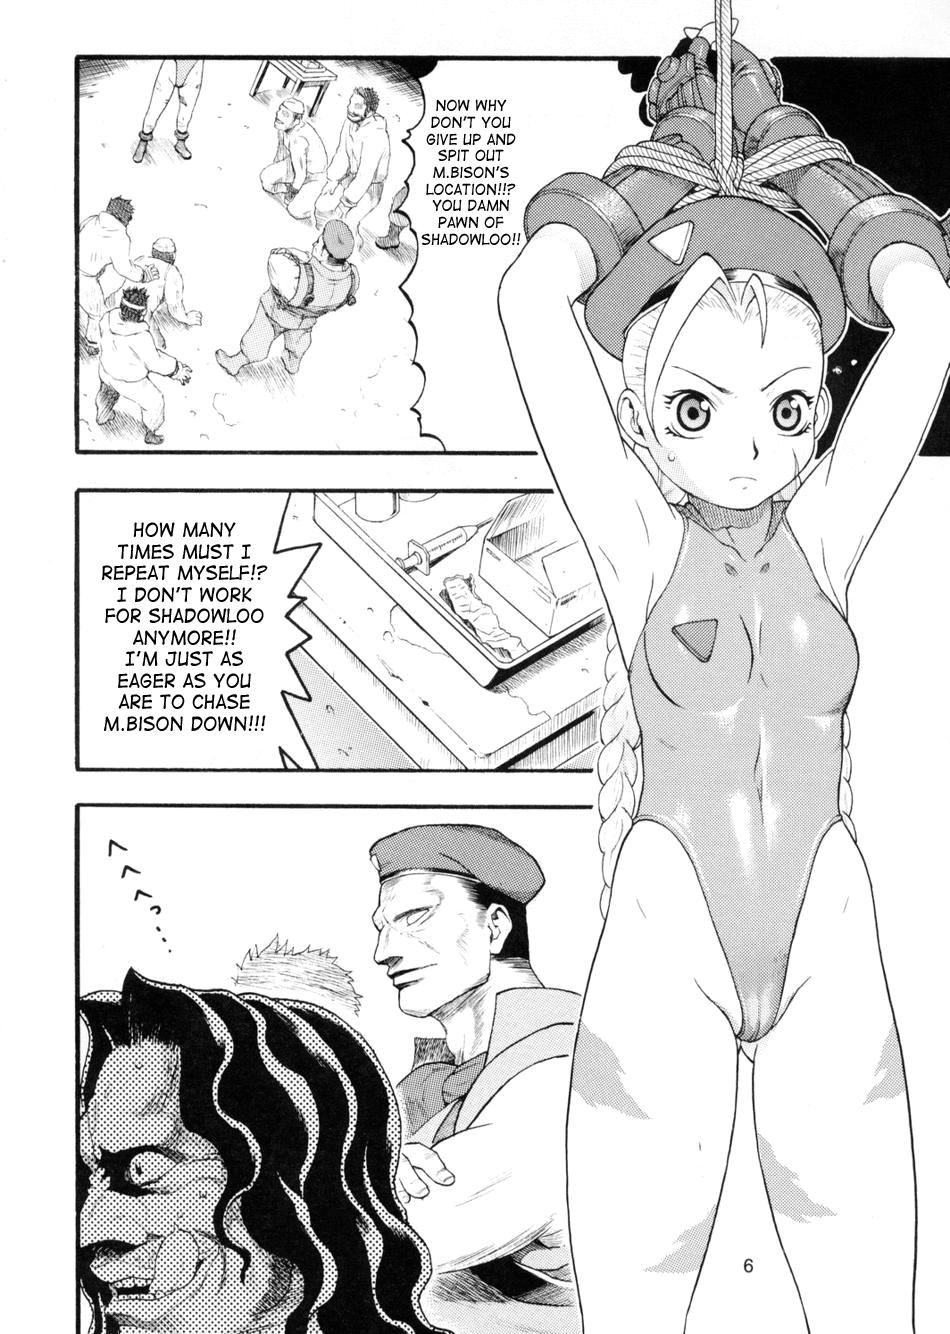 Prostitute Cammy Bon | Cammy Book - Street fighter Eat - Page 5